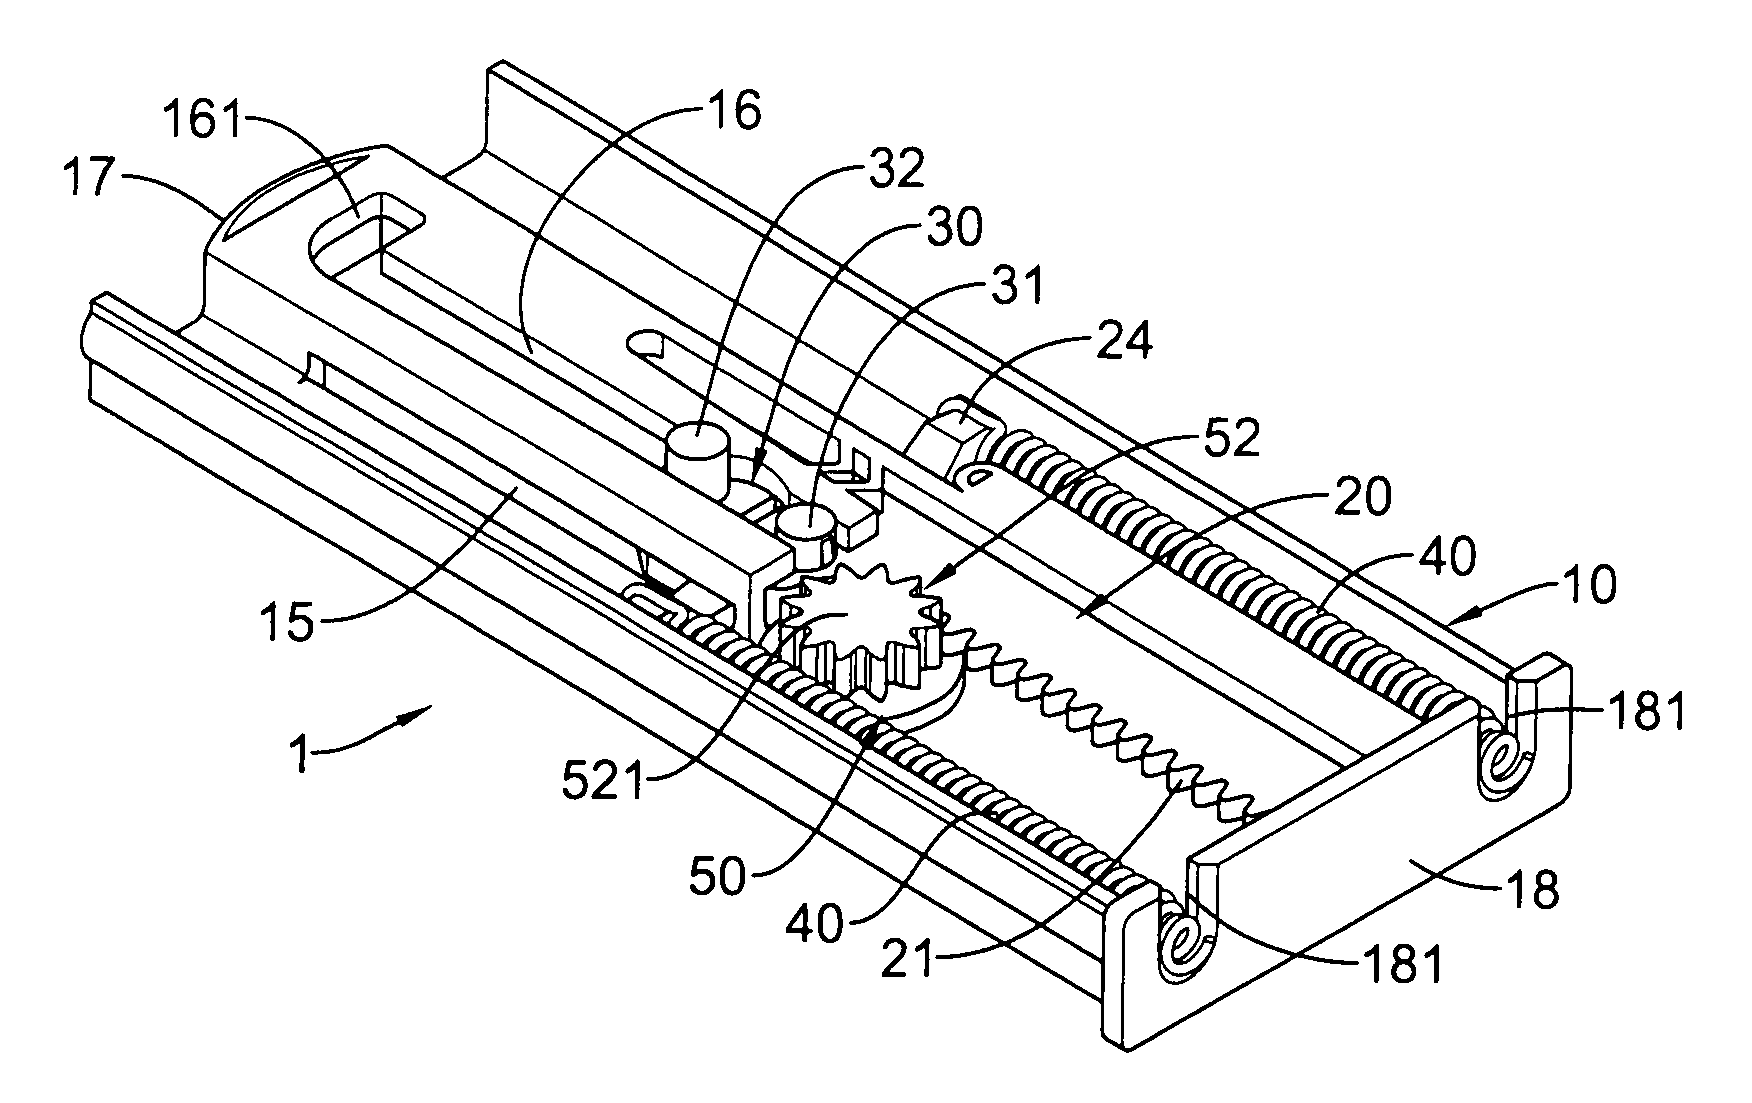 Auto-returning assembly with mechanical damper